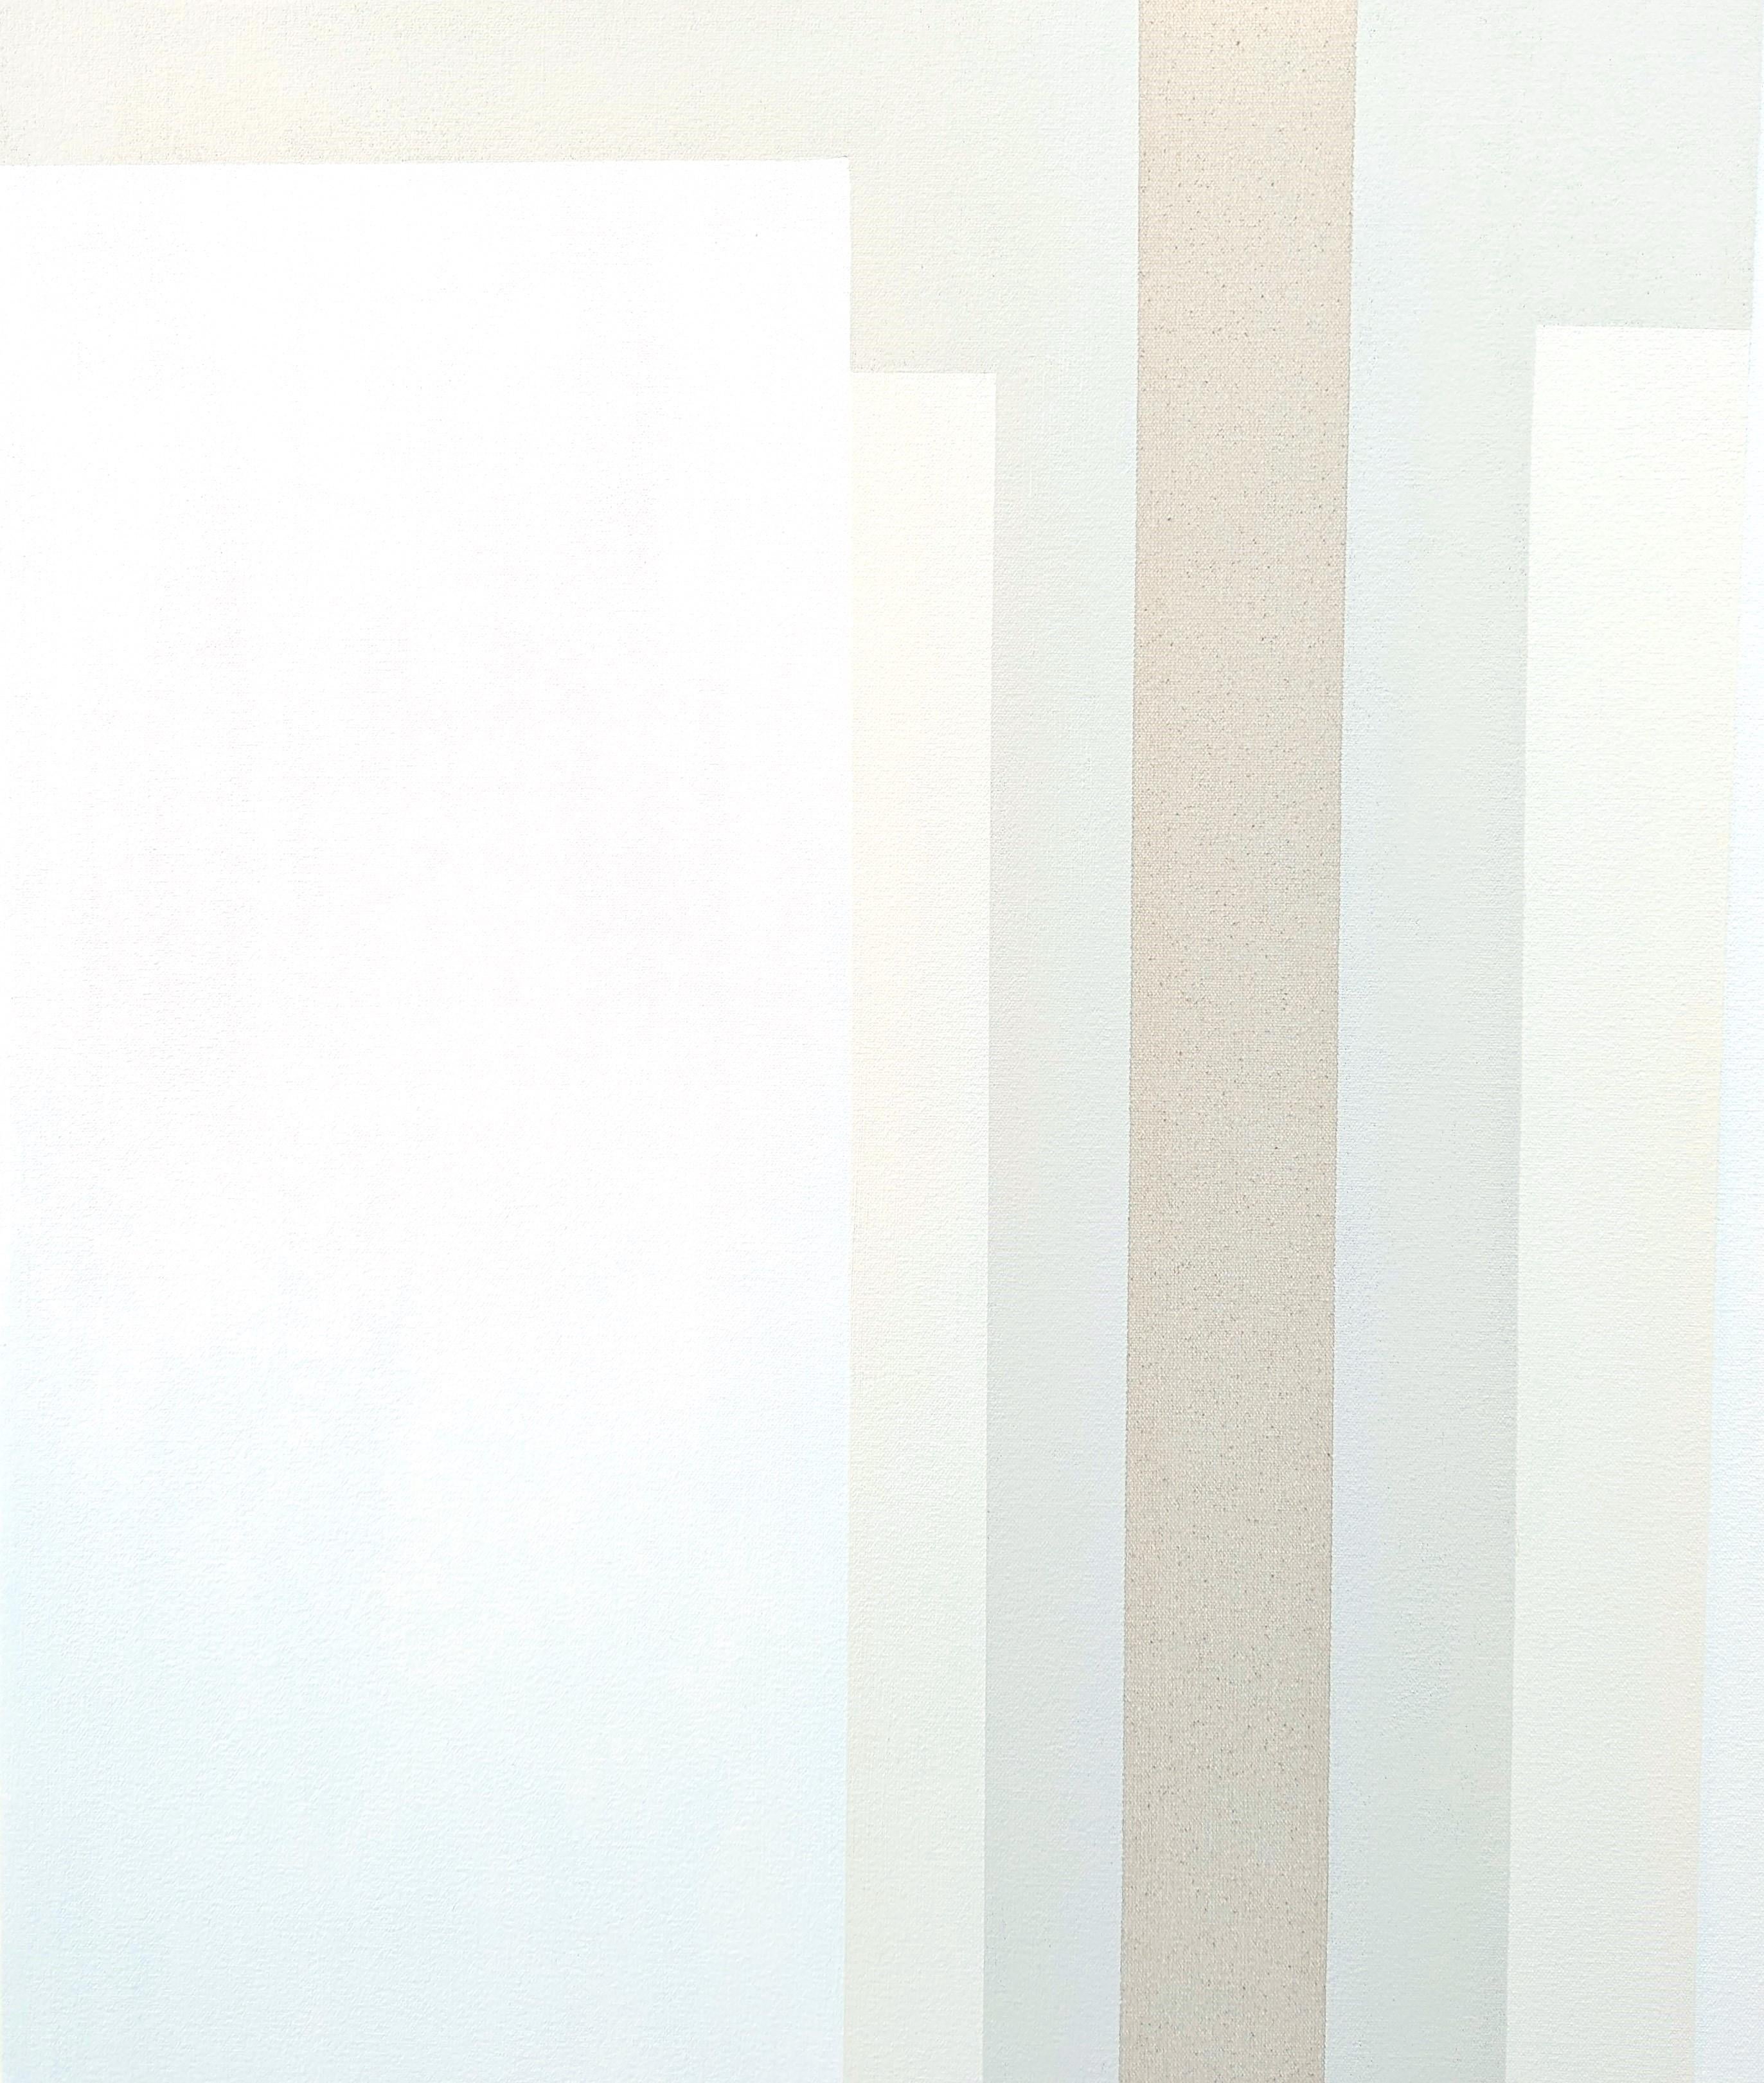 Contemporary abstract geometric painting by Houston-based artist Holland Geibel. The work features layers of rectangular shapes in various neutral tones of tan, white, and black. Signed, titled, and dated on the reverse. Currently unframed, but